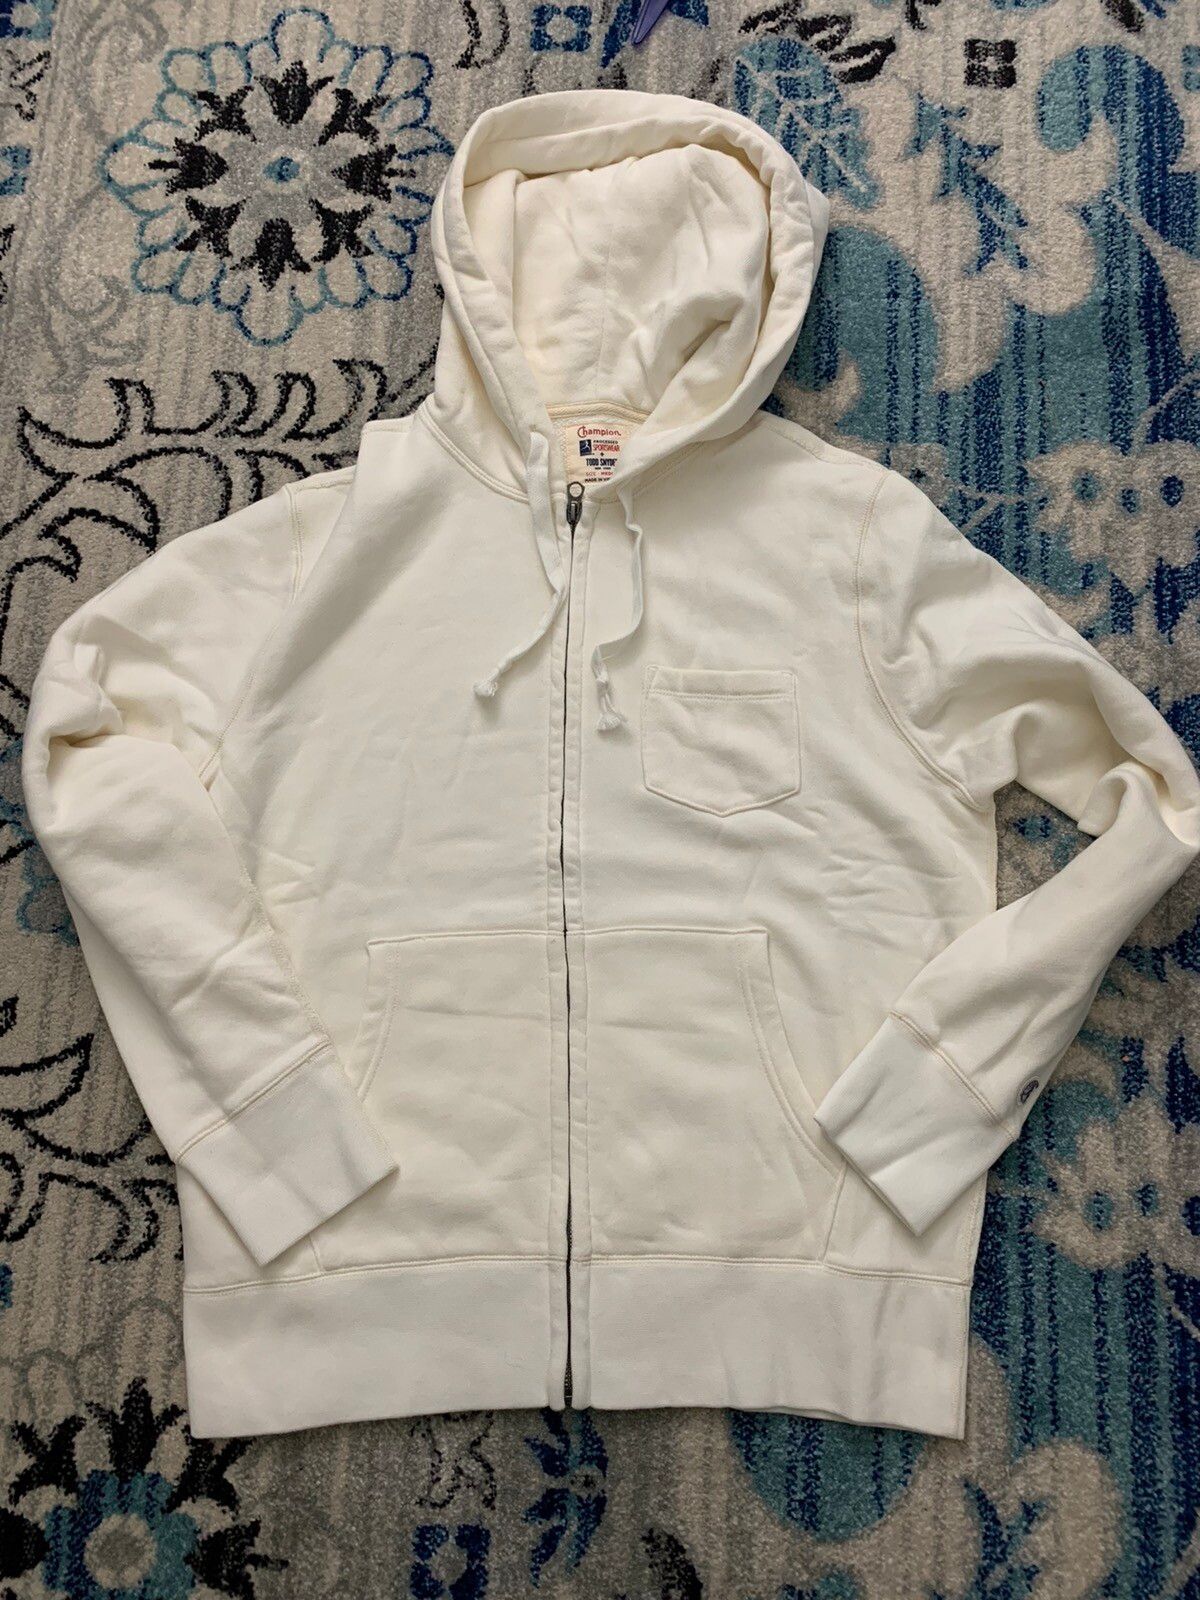 Todd Snyder Midweight Full-Zip Hoodie with Pocket | Grailed